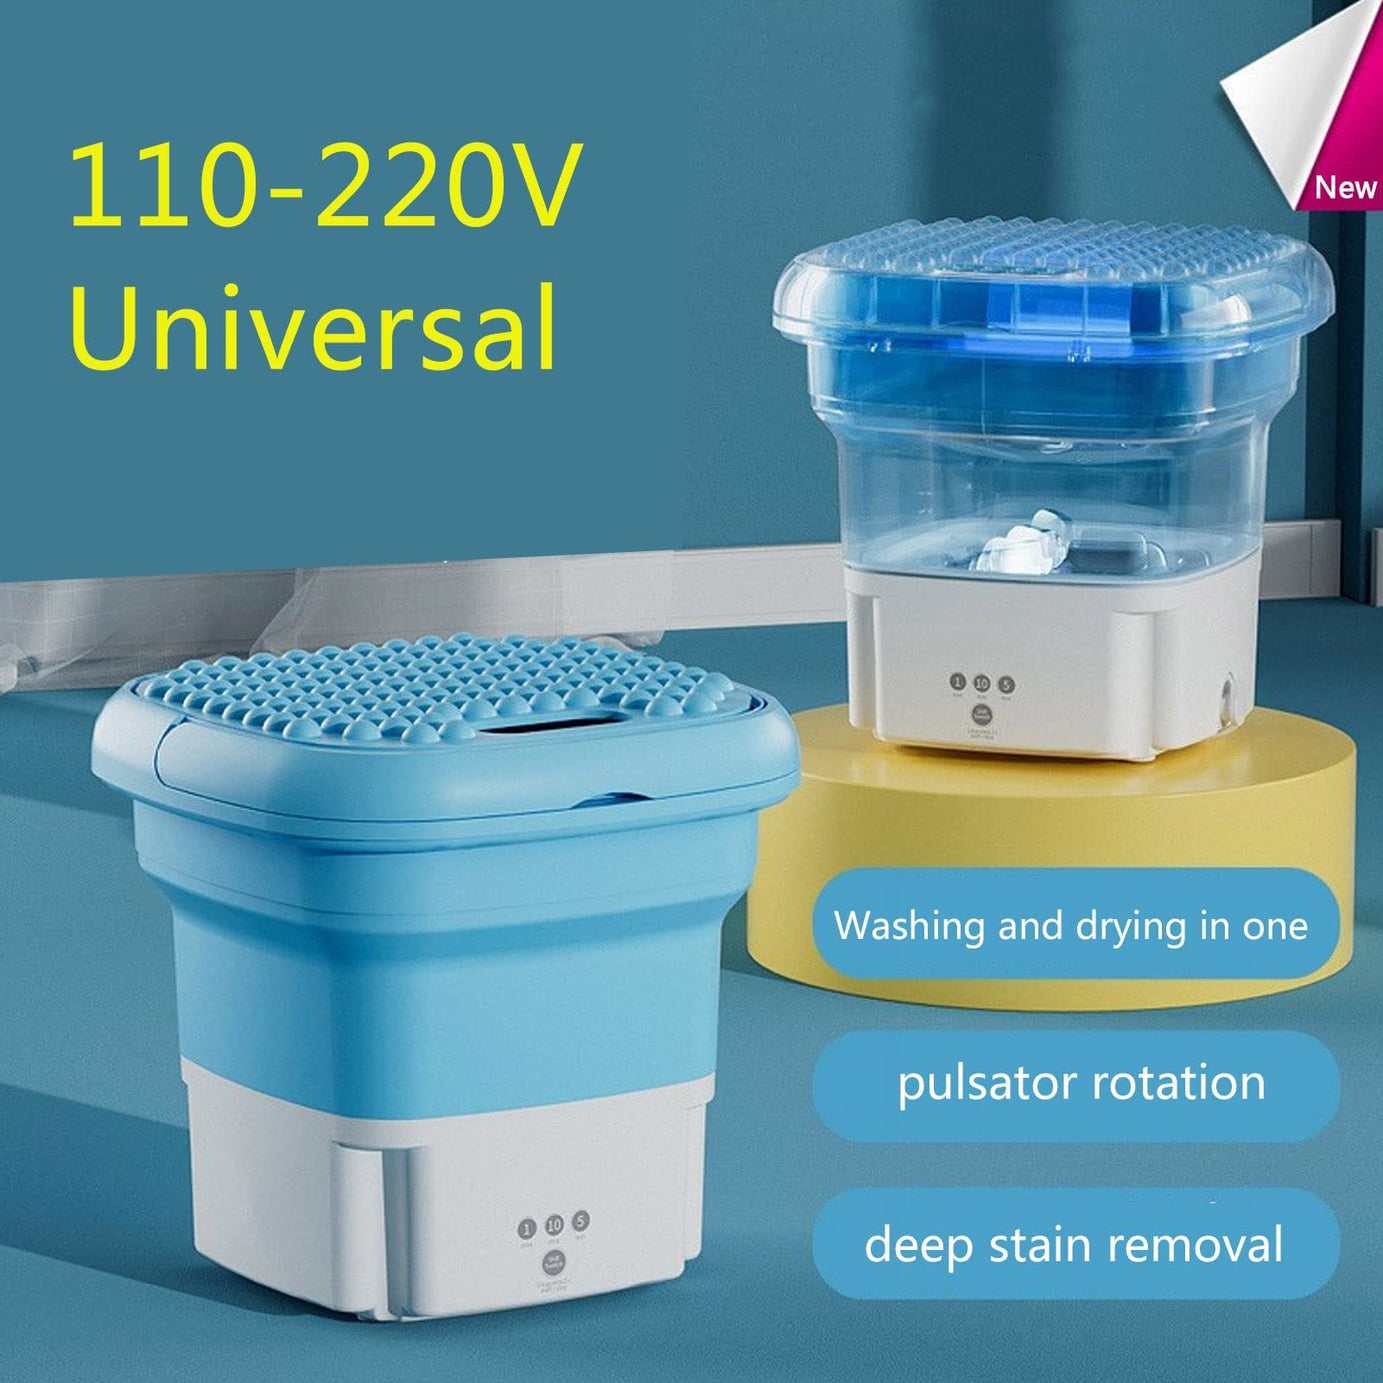 Imported foldable Portable Washing Machine For Easy & Daily Use Rs 7999